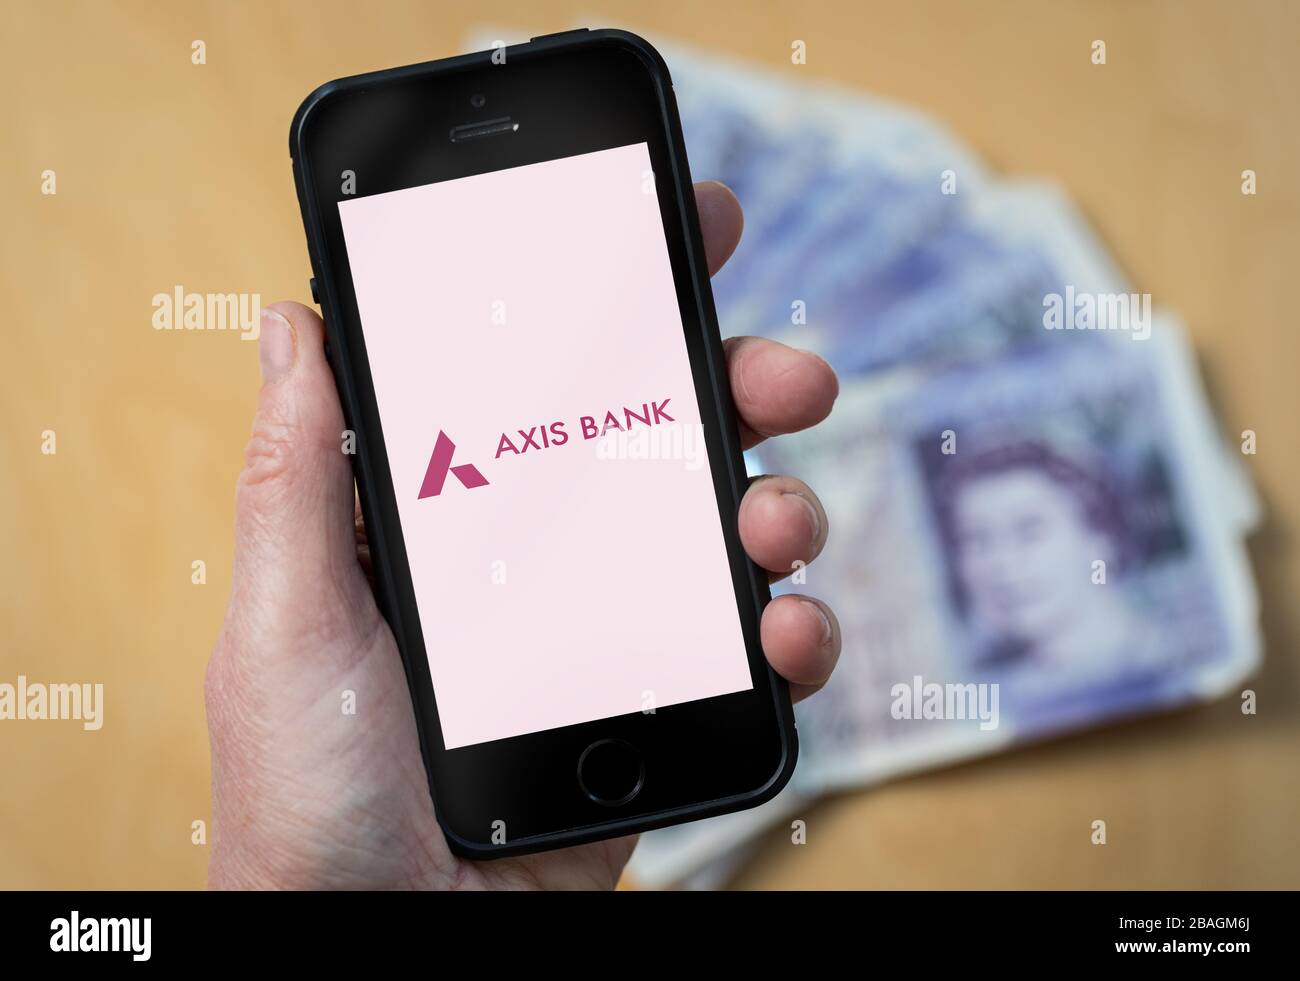 A woman looking at the Axis Bank logo on a mobile phone. (editorial Use Only) Stock Photo